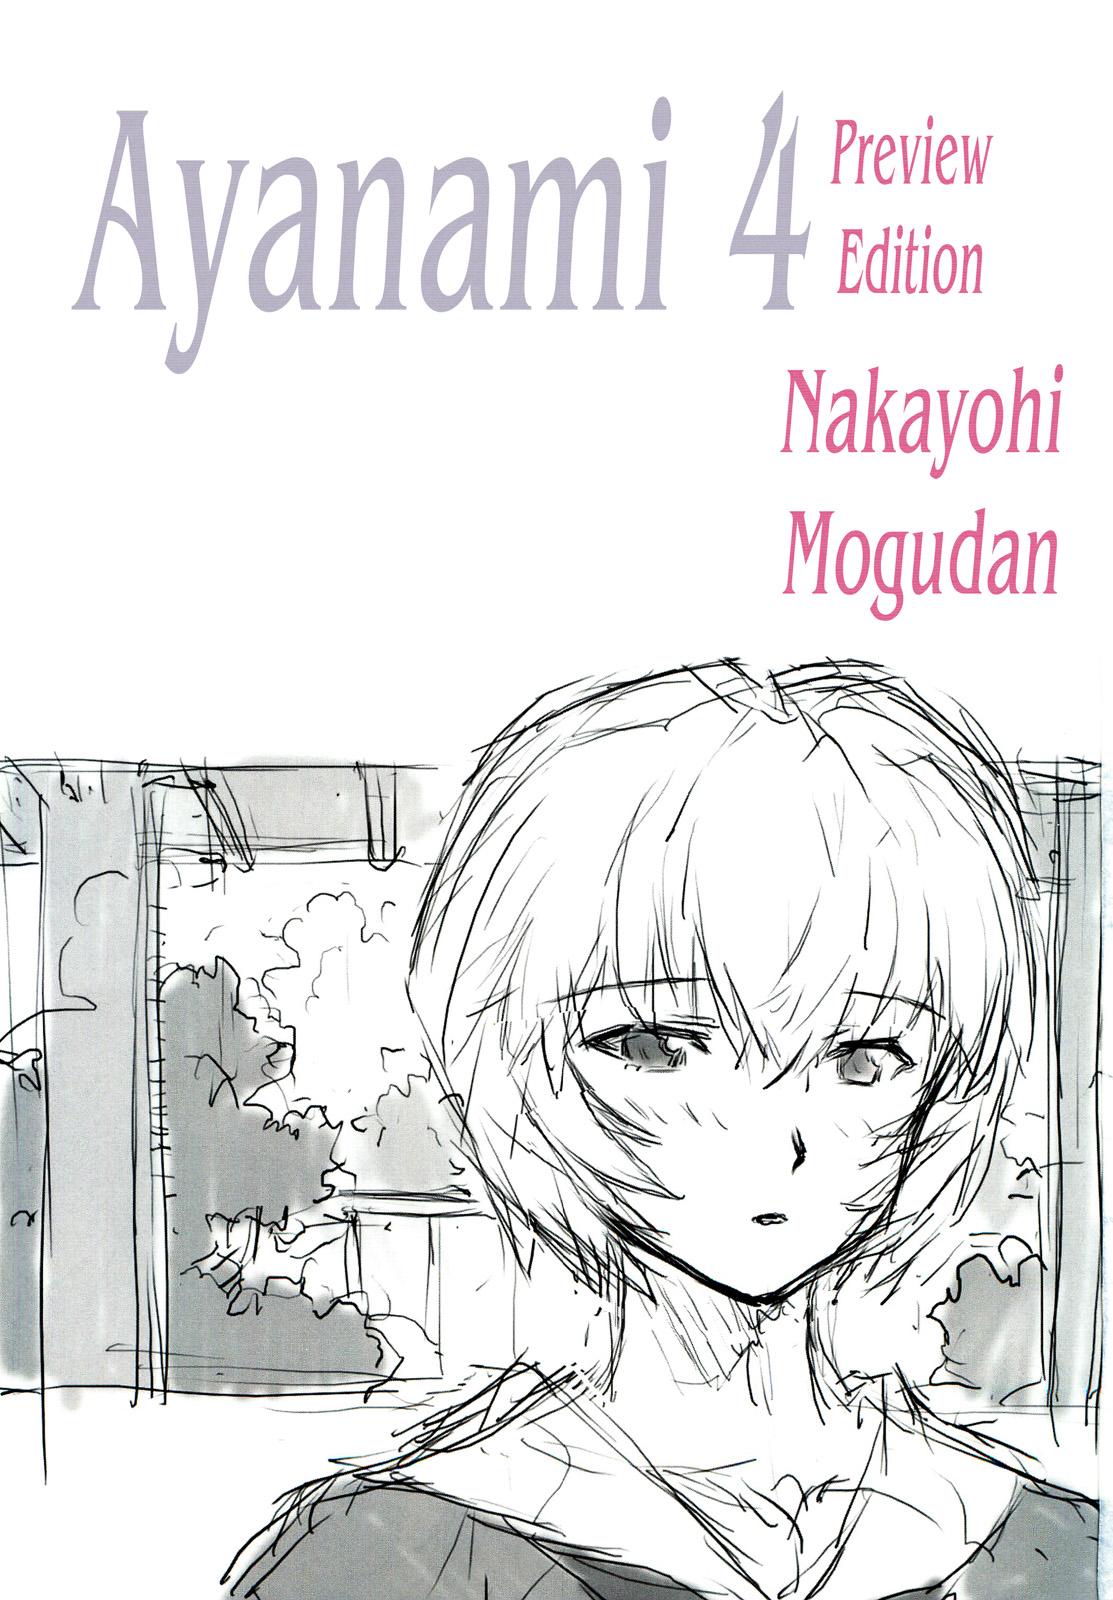 Stockings Ayanami Dai 4 Kai Pure Han | Ayanami 4 Preview Edition - Neon genesis evangelion Pure18 - Page 3